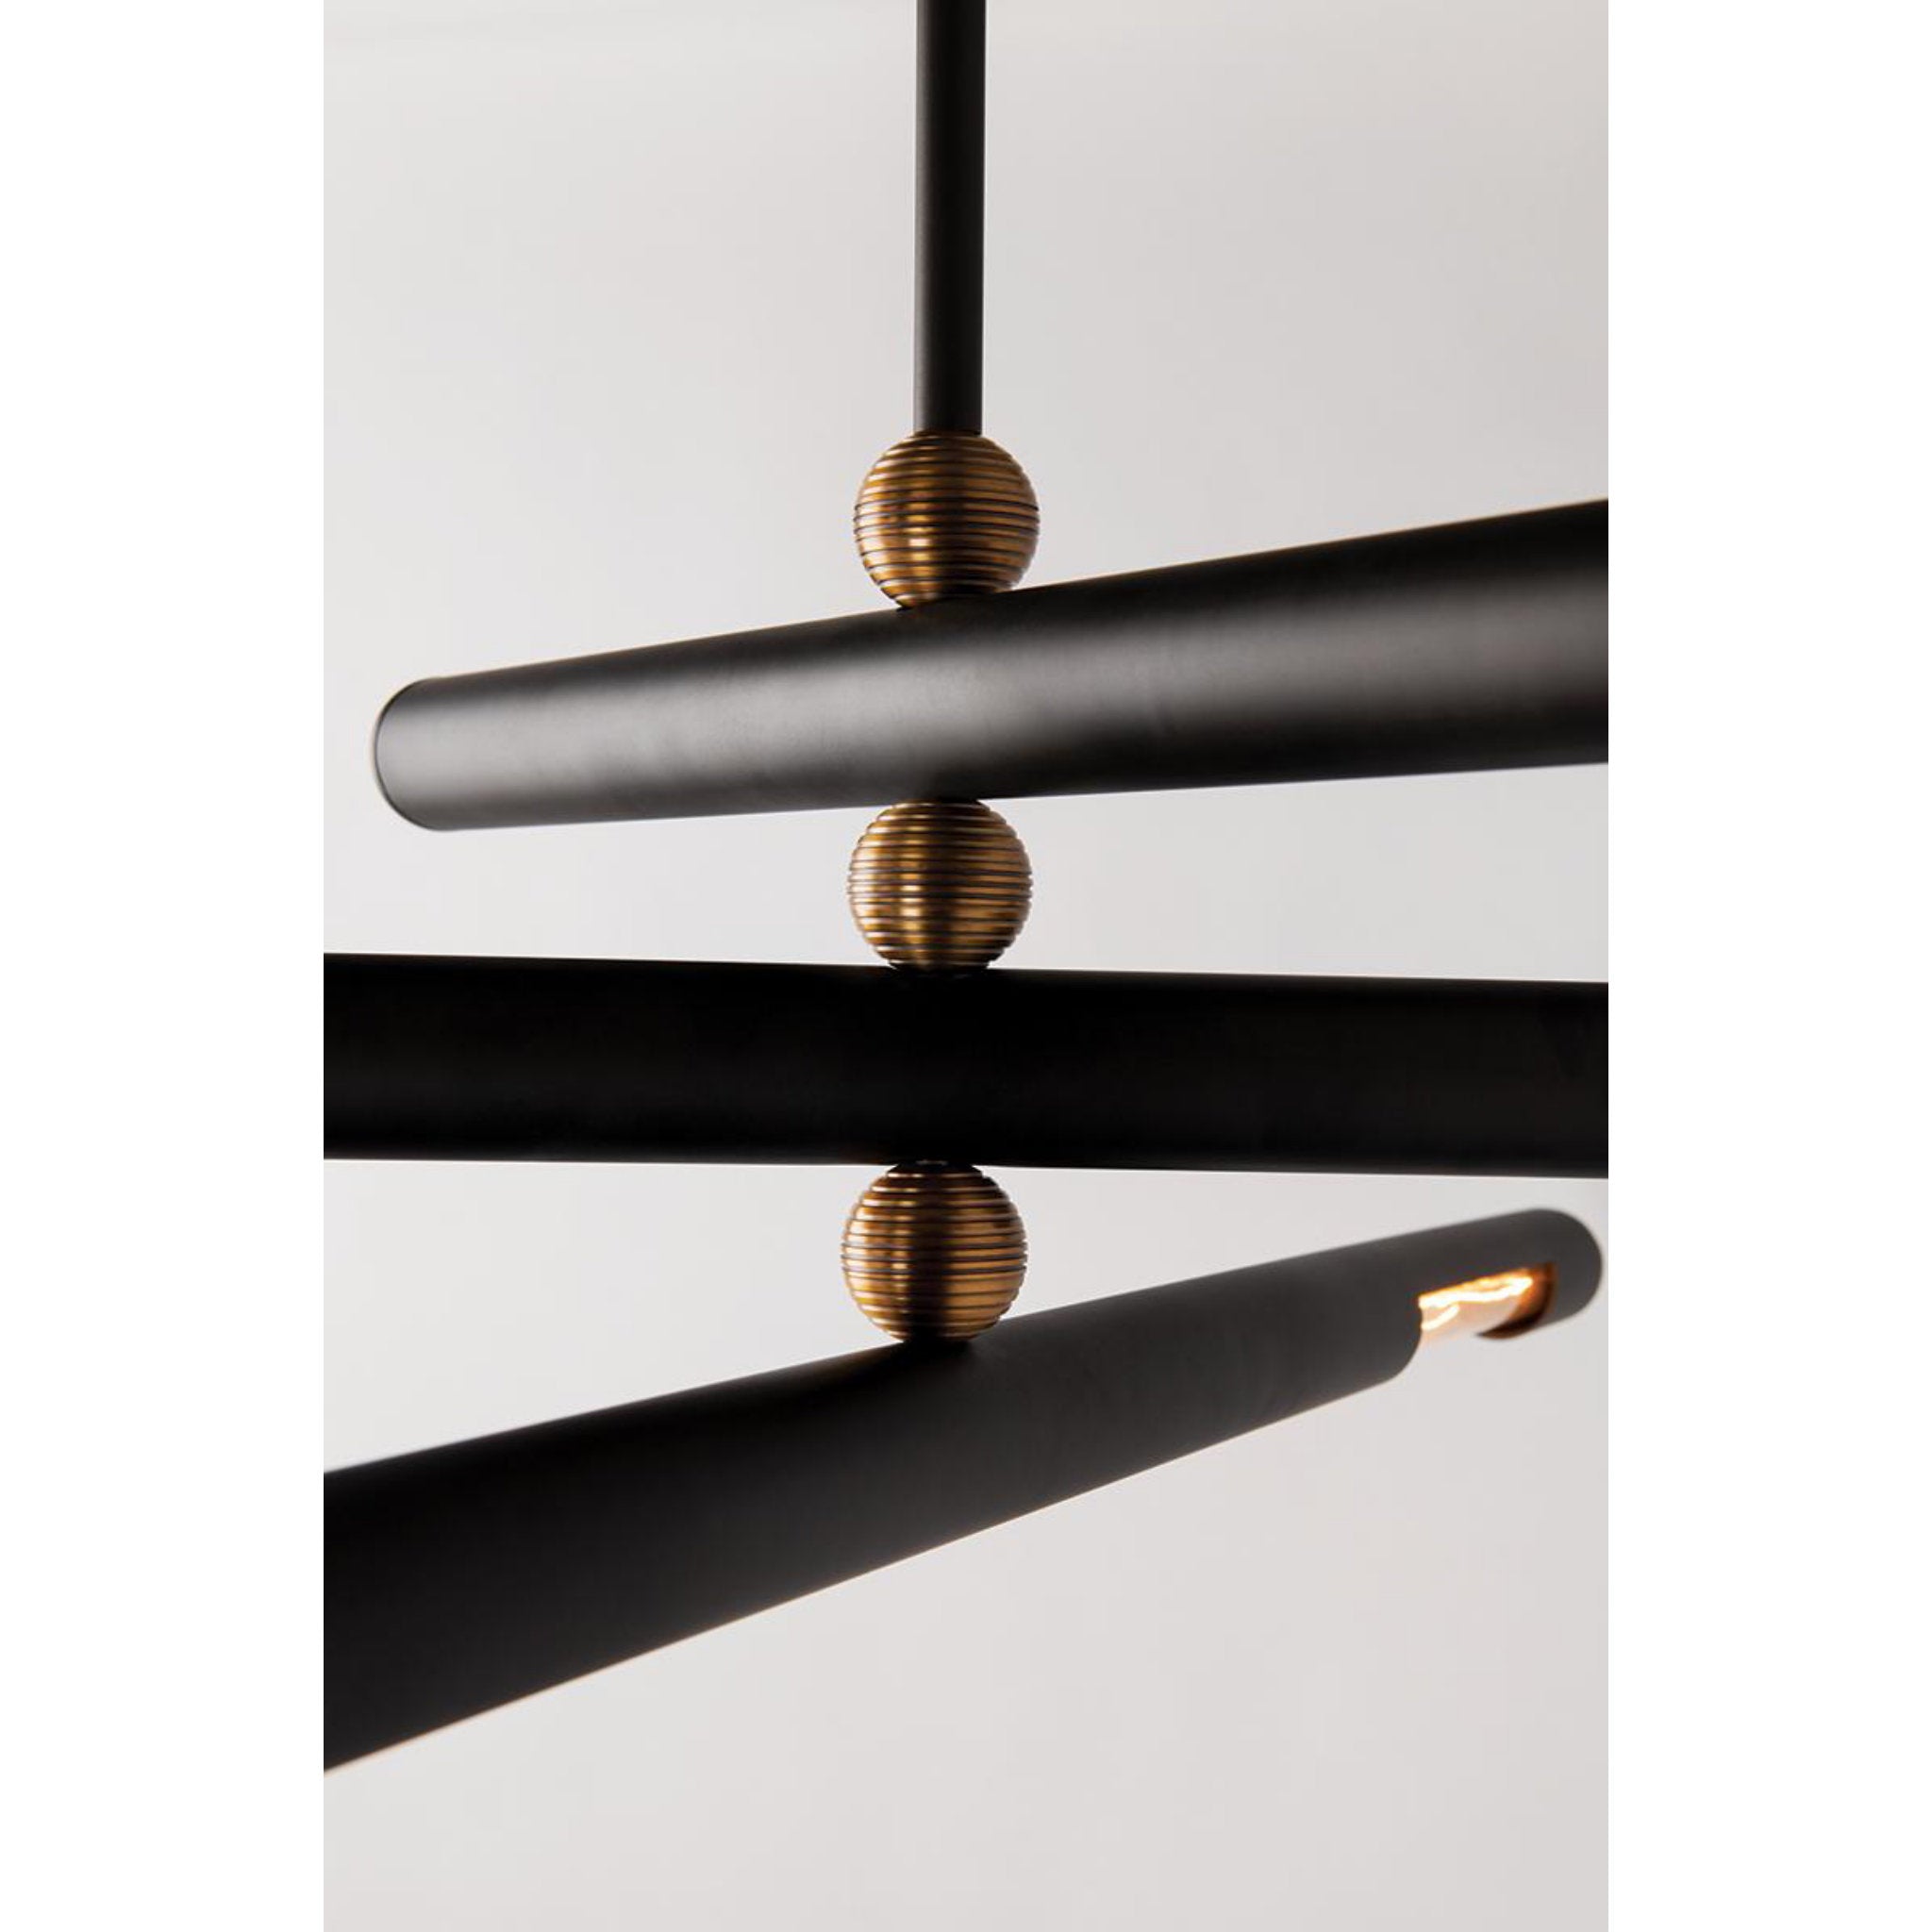 Hendrix 2 Light Wall Sconce in Chemical Bronze